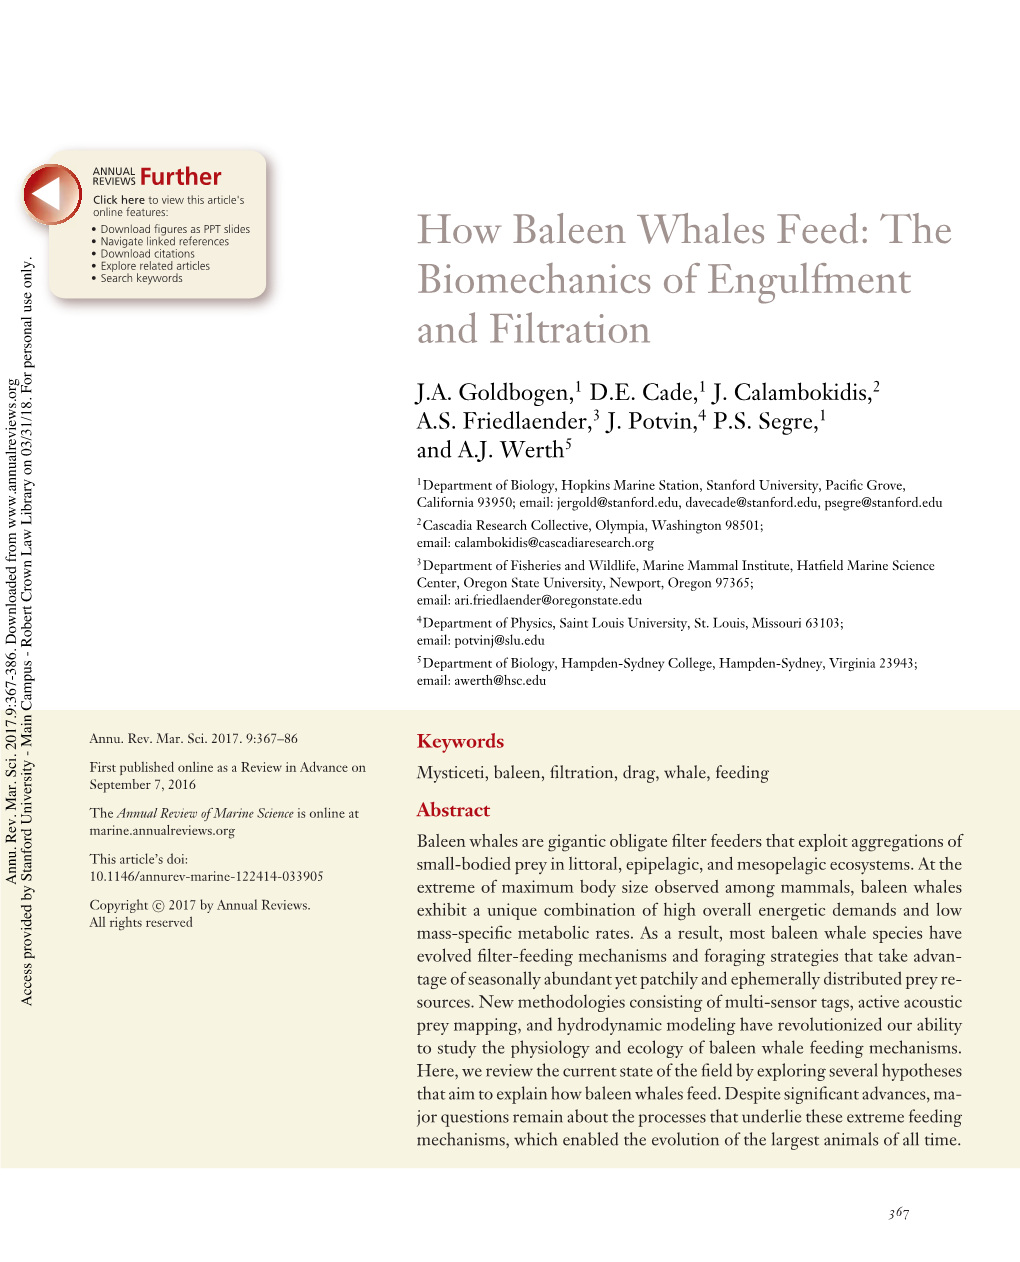 How Baleen Whales Feed: the Biomechanics of Engulfment and Filtration